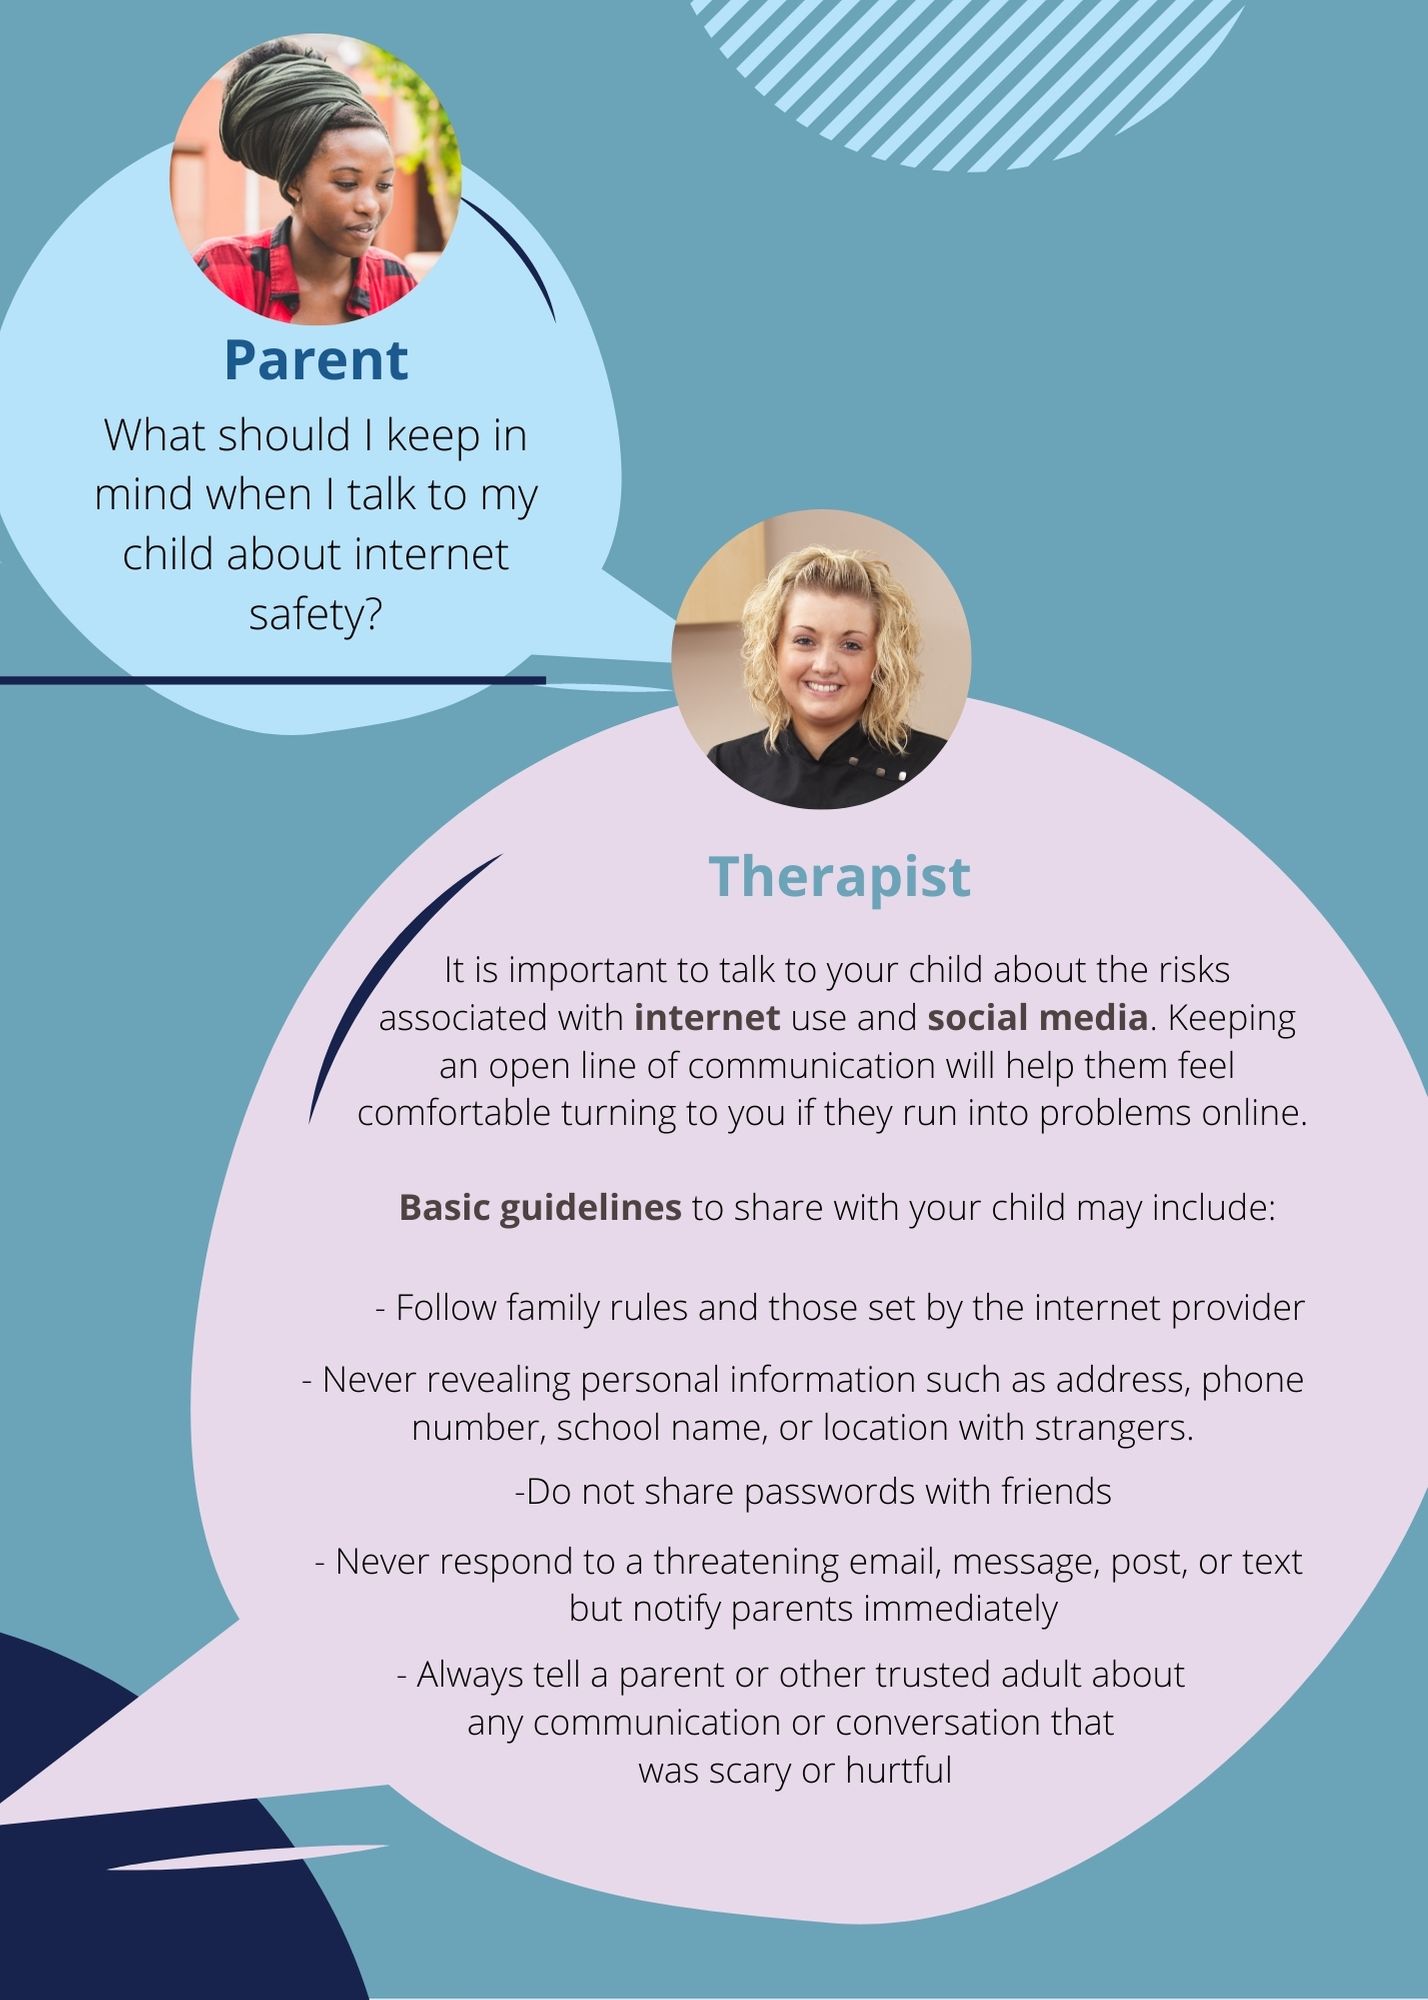 A parent asks how to talk to her child about internet safety. A therapist answers with some basic guidelines: never reveal personal information to strangers, do not share passwords with friends, never respond to a threatening email/text but notify your parents immediately, talk to a trusted adult about any communication that was scary or hurtful.